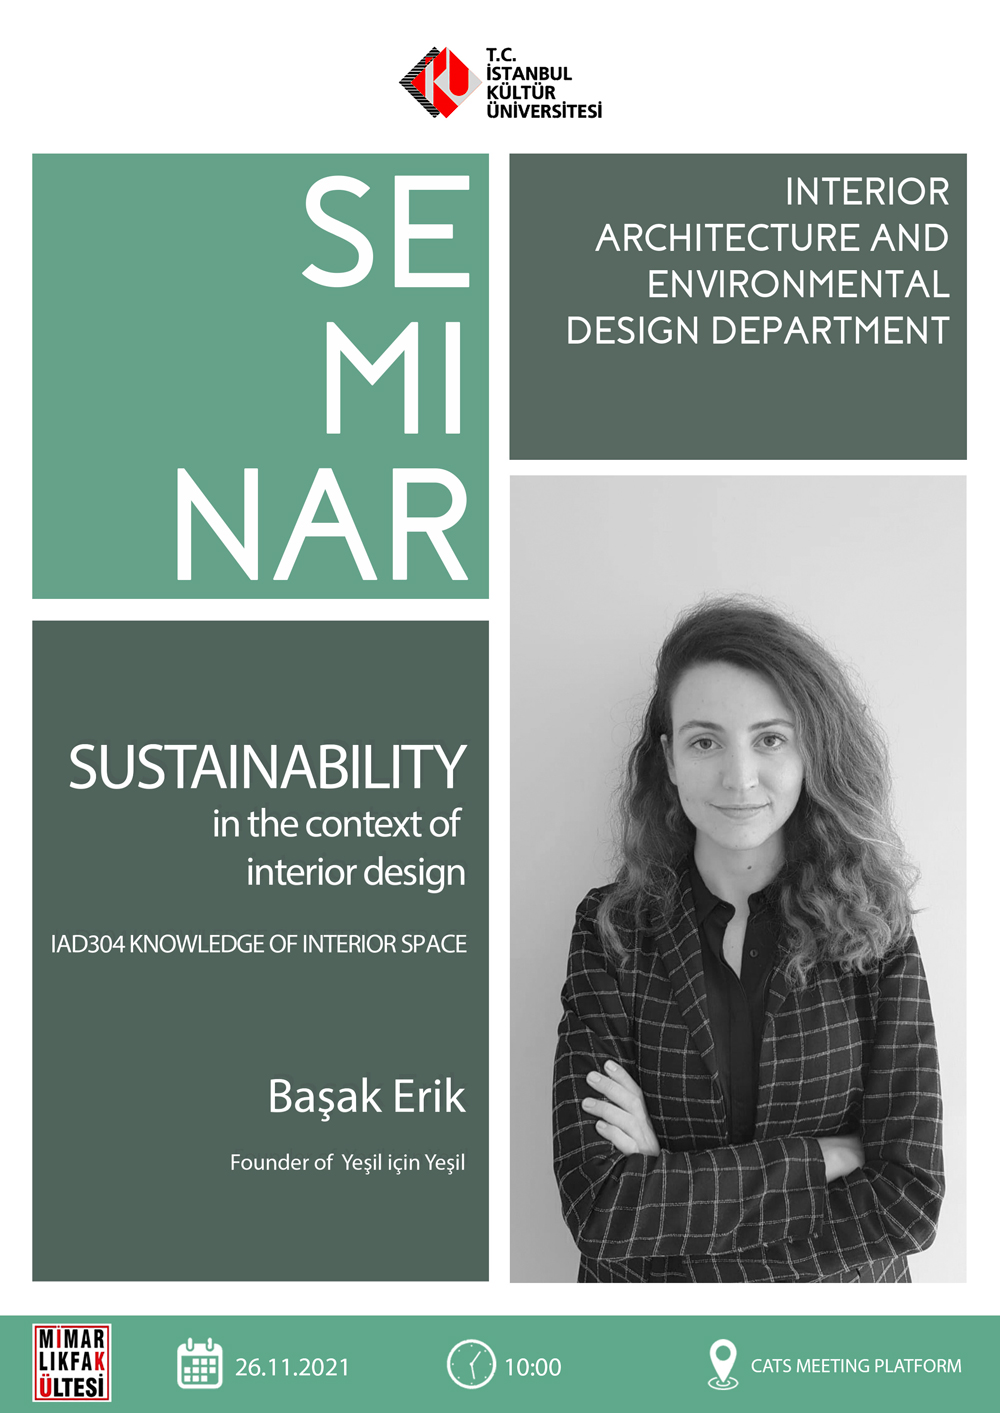 “Sustainability: in the context of interior design”